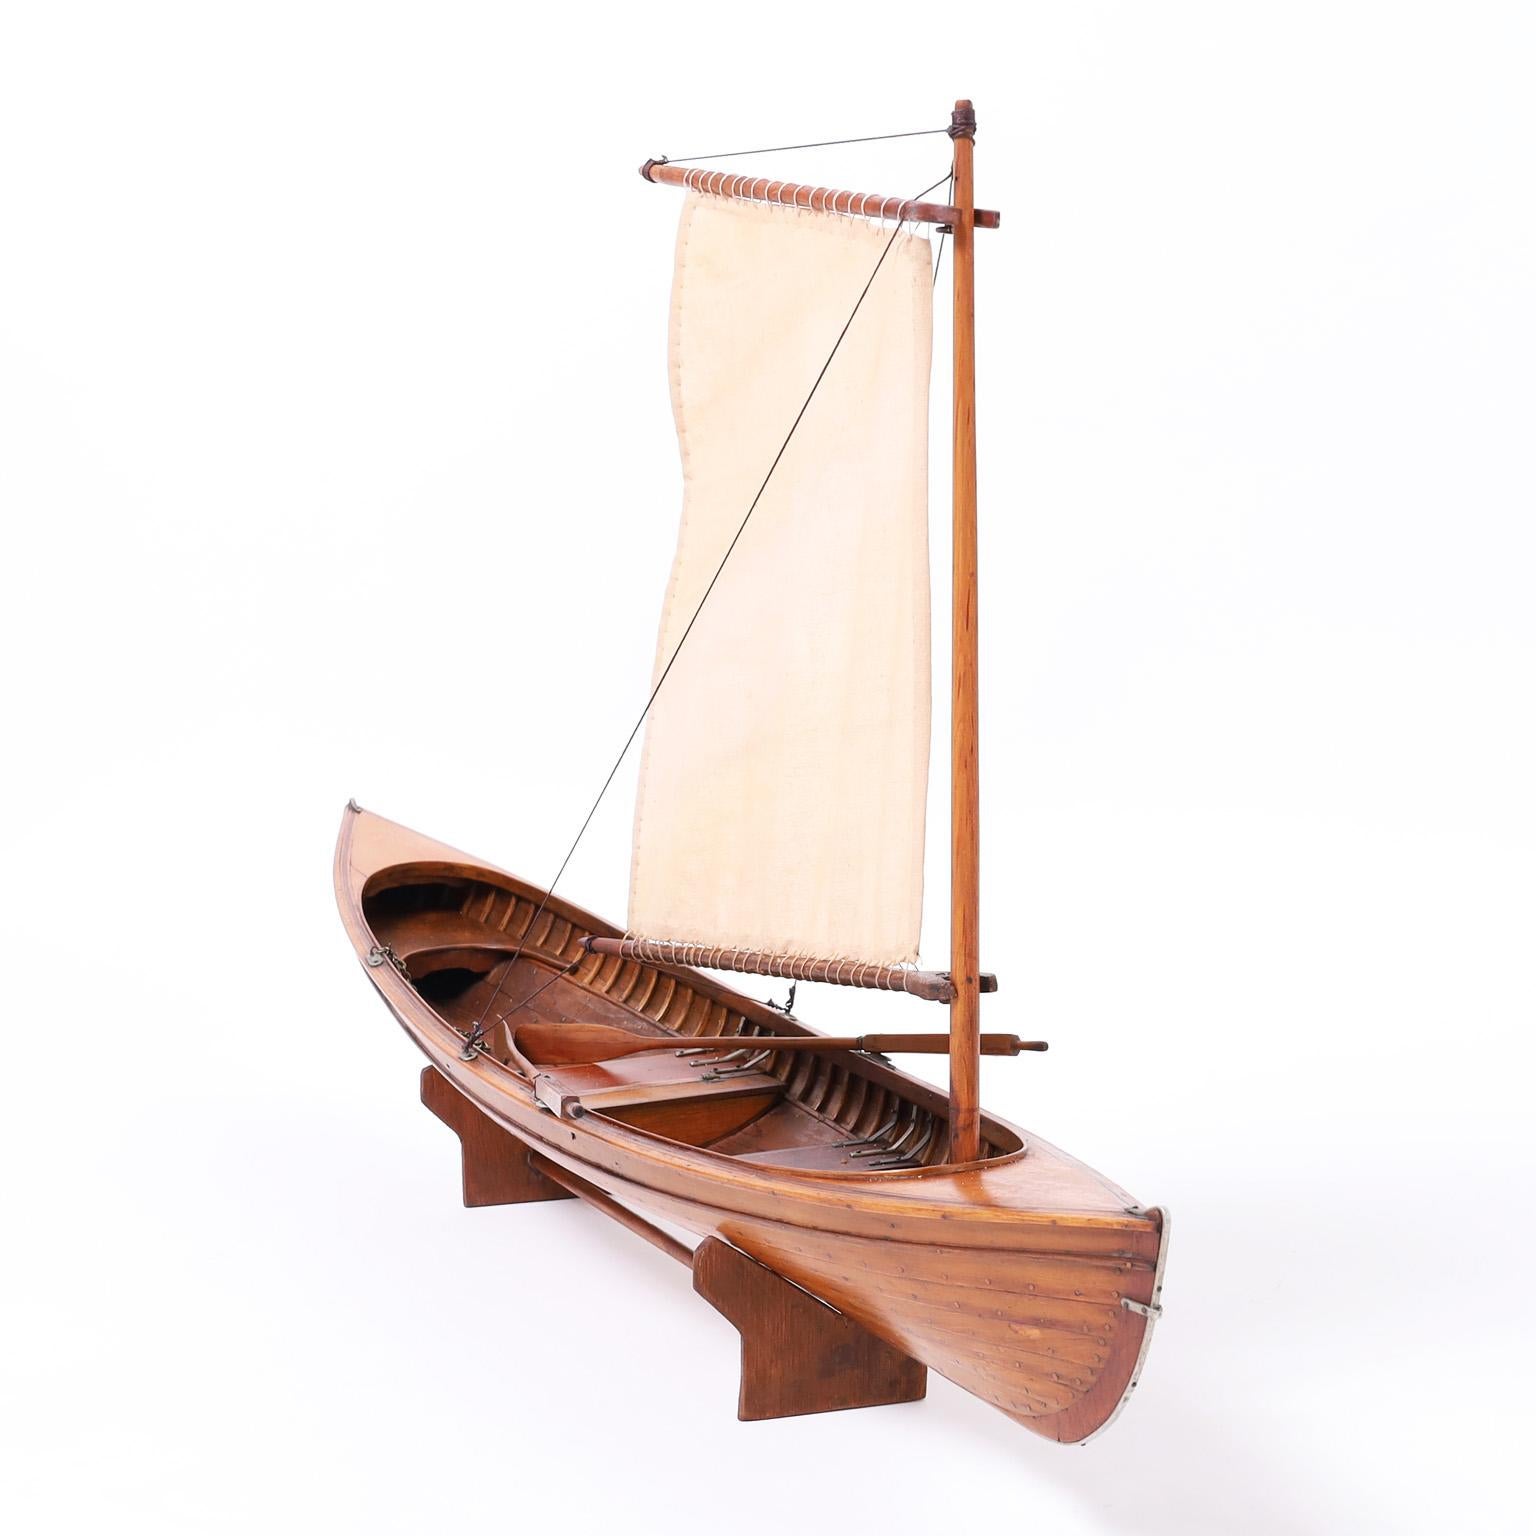 Lofty antique English Edwardian Thames river rowing skiff model with sale, hand crafted in mahogany with ambitious accuracy. Presented on a hand crafted wood base.